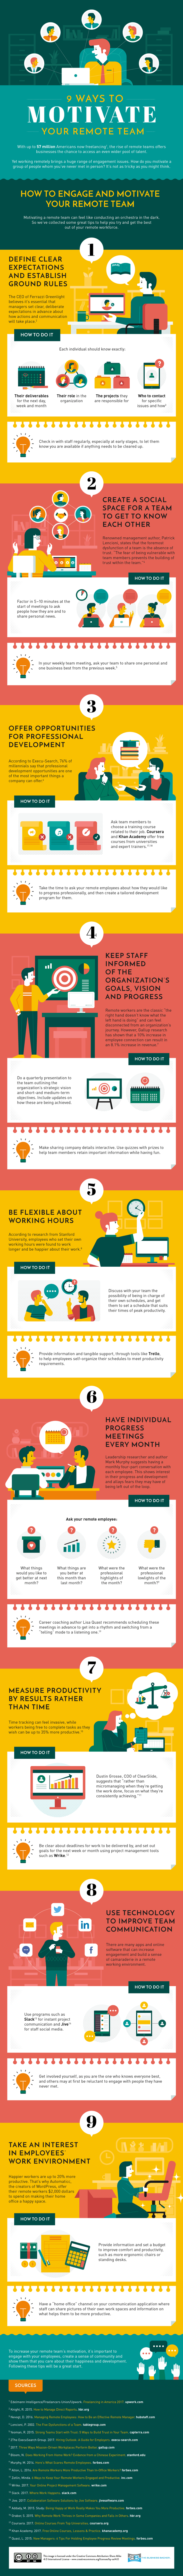 [Infographic] How To Build A Happy Remote Team